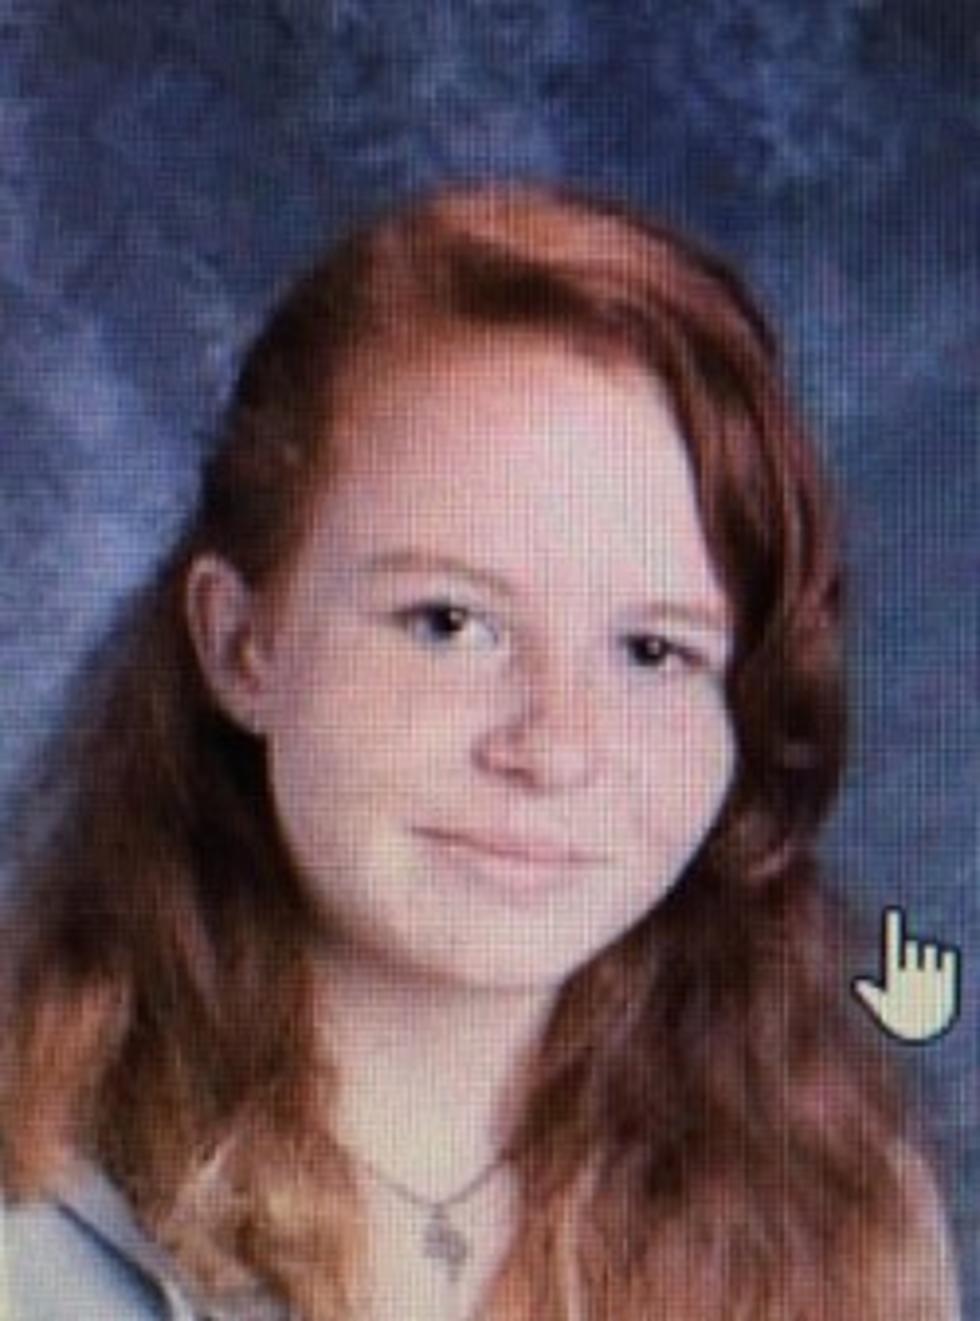 Police in Neptune City continue search for 17-year old missing since Wednesday